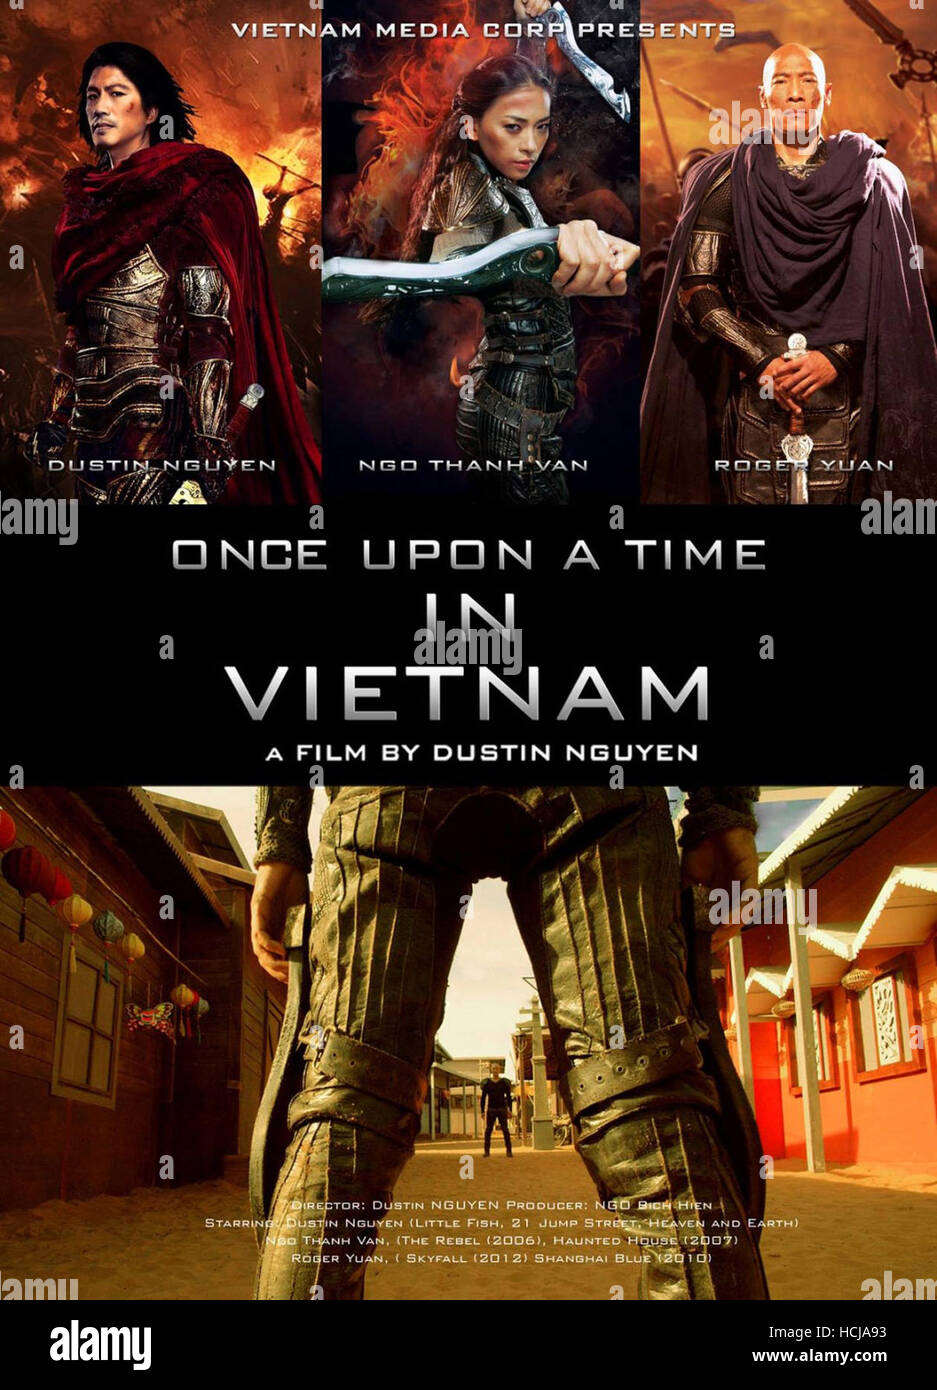 Once Upon a Time in Vietnam (2013) Hindi Dubbed (ORG) & Vietnamese [Dual Audio] BluRay 1080p 720p [Full Movie]